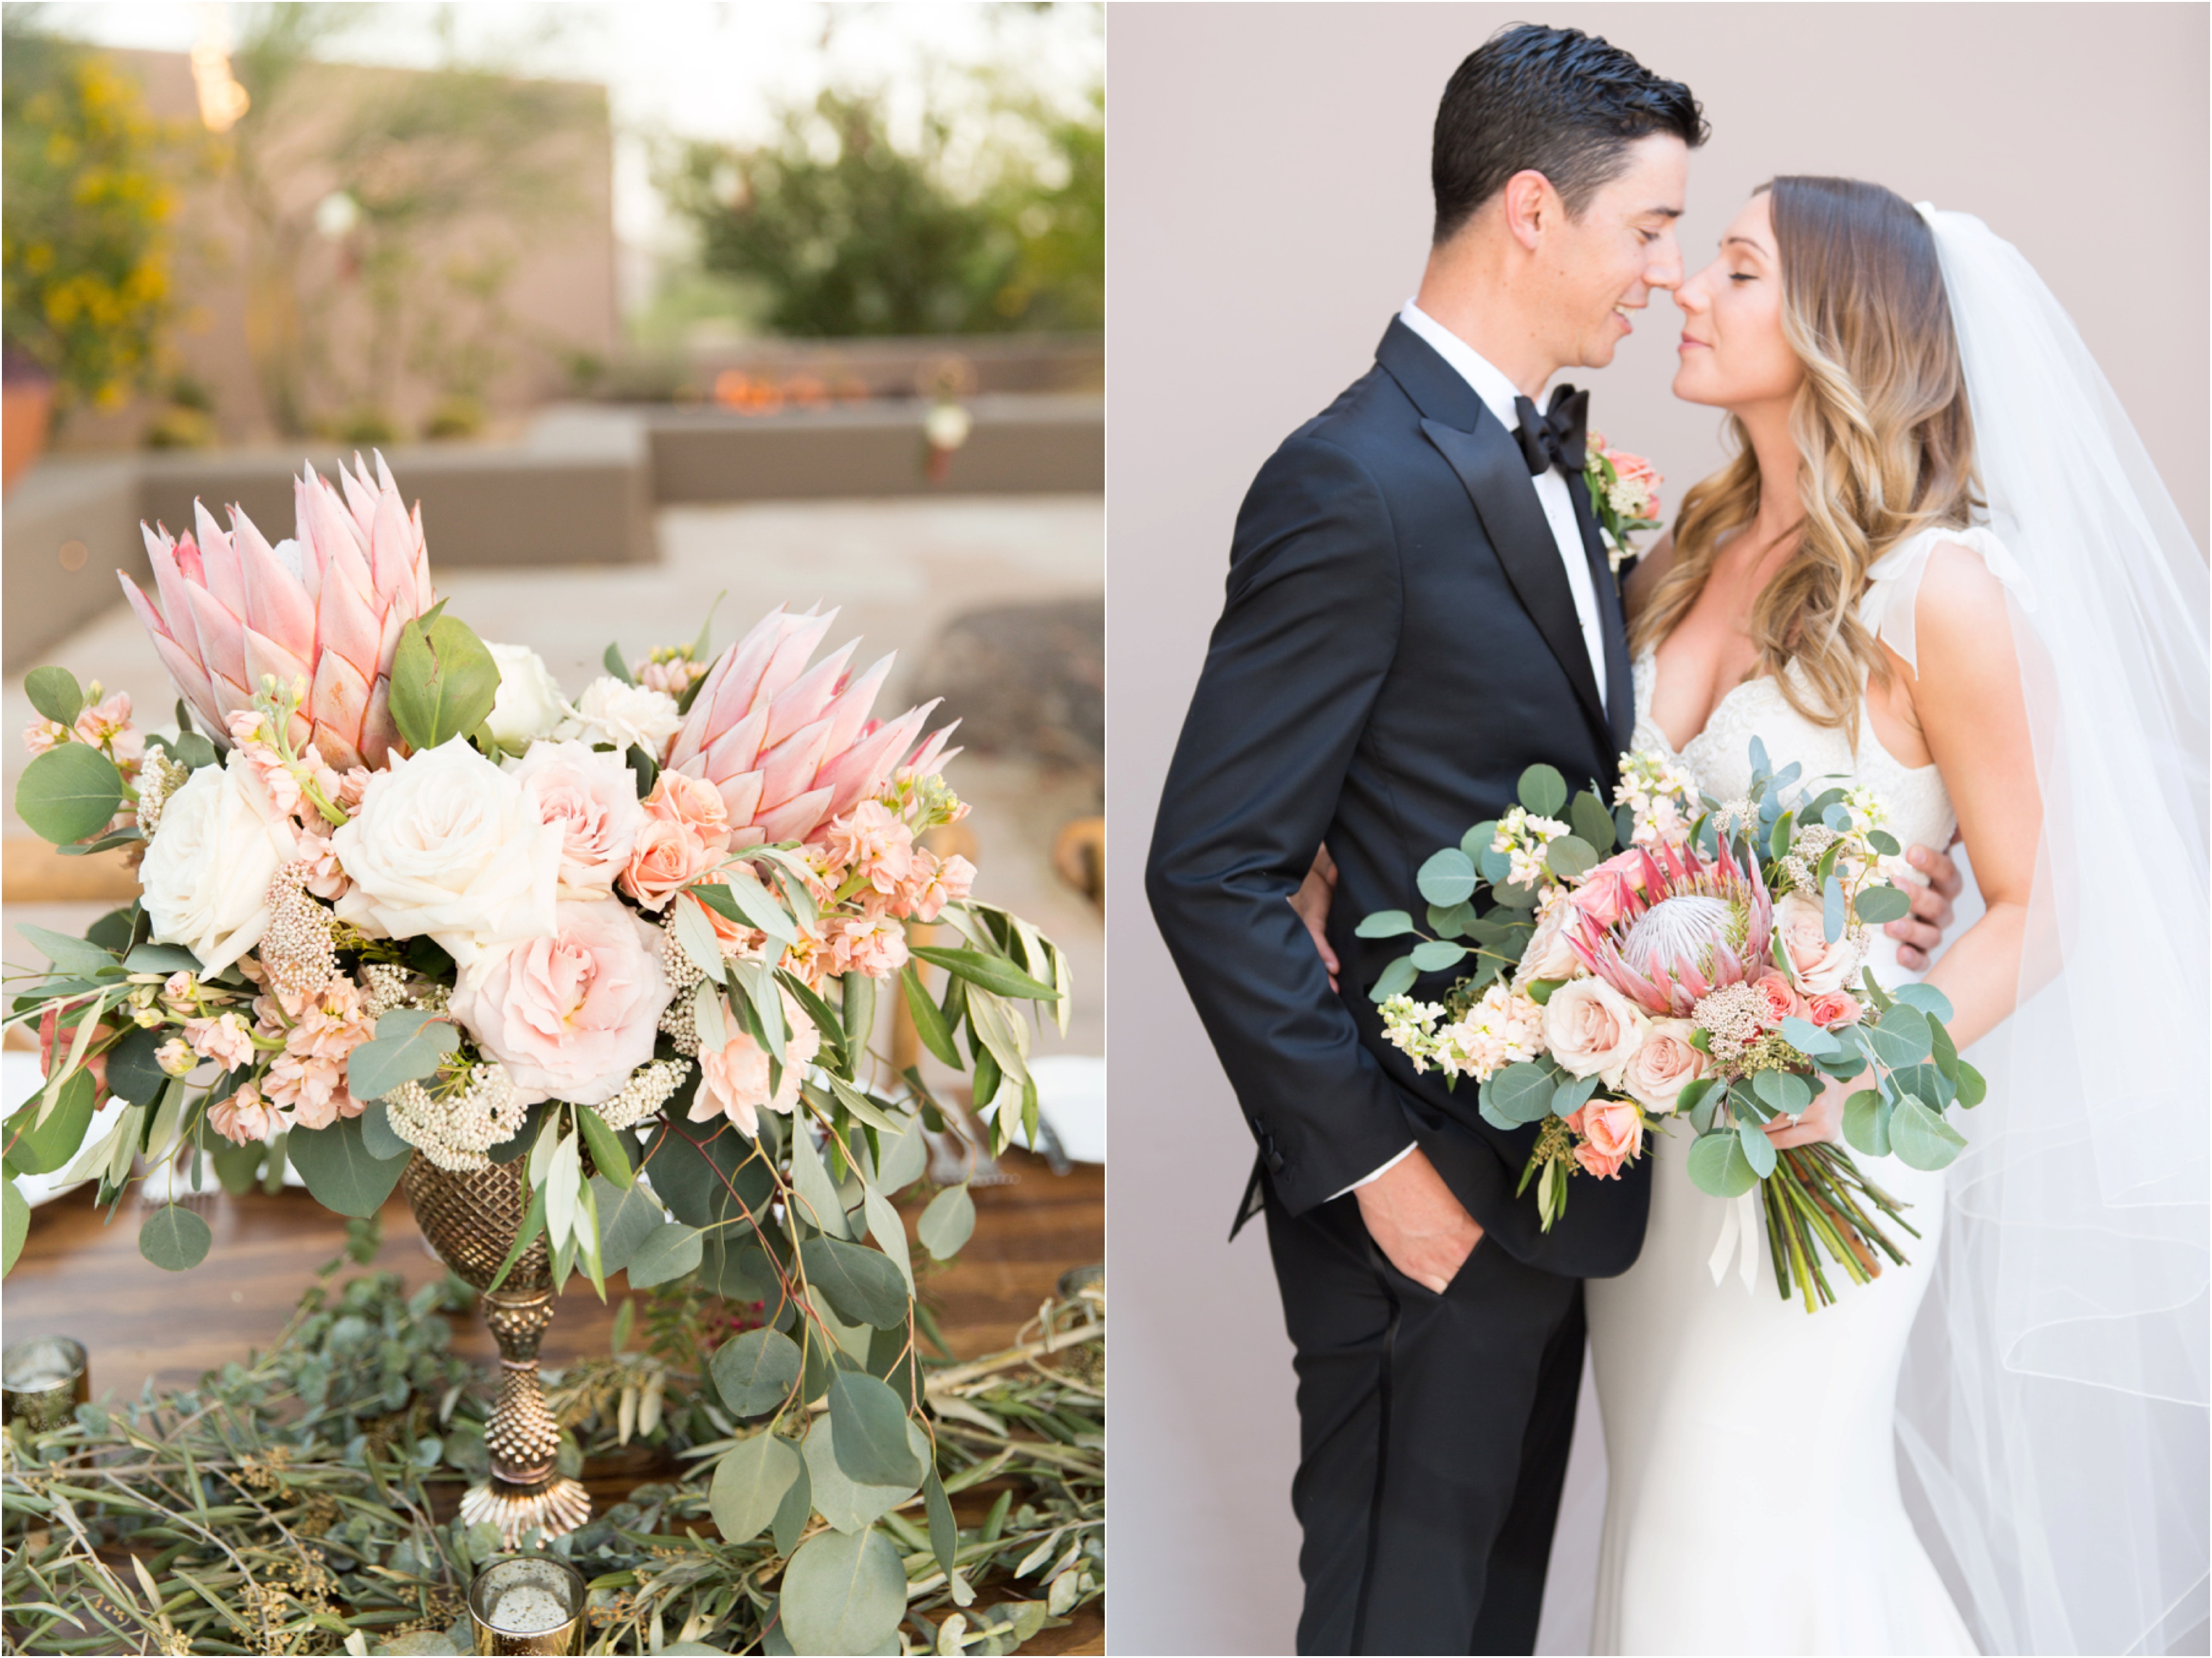 Blush pink bouquet with bride and groom